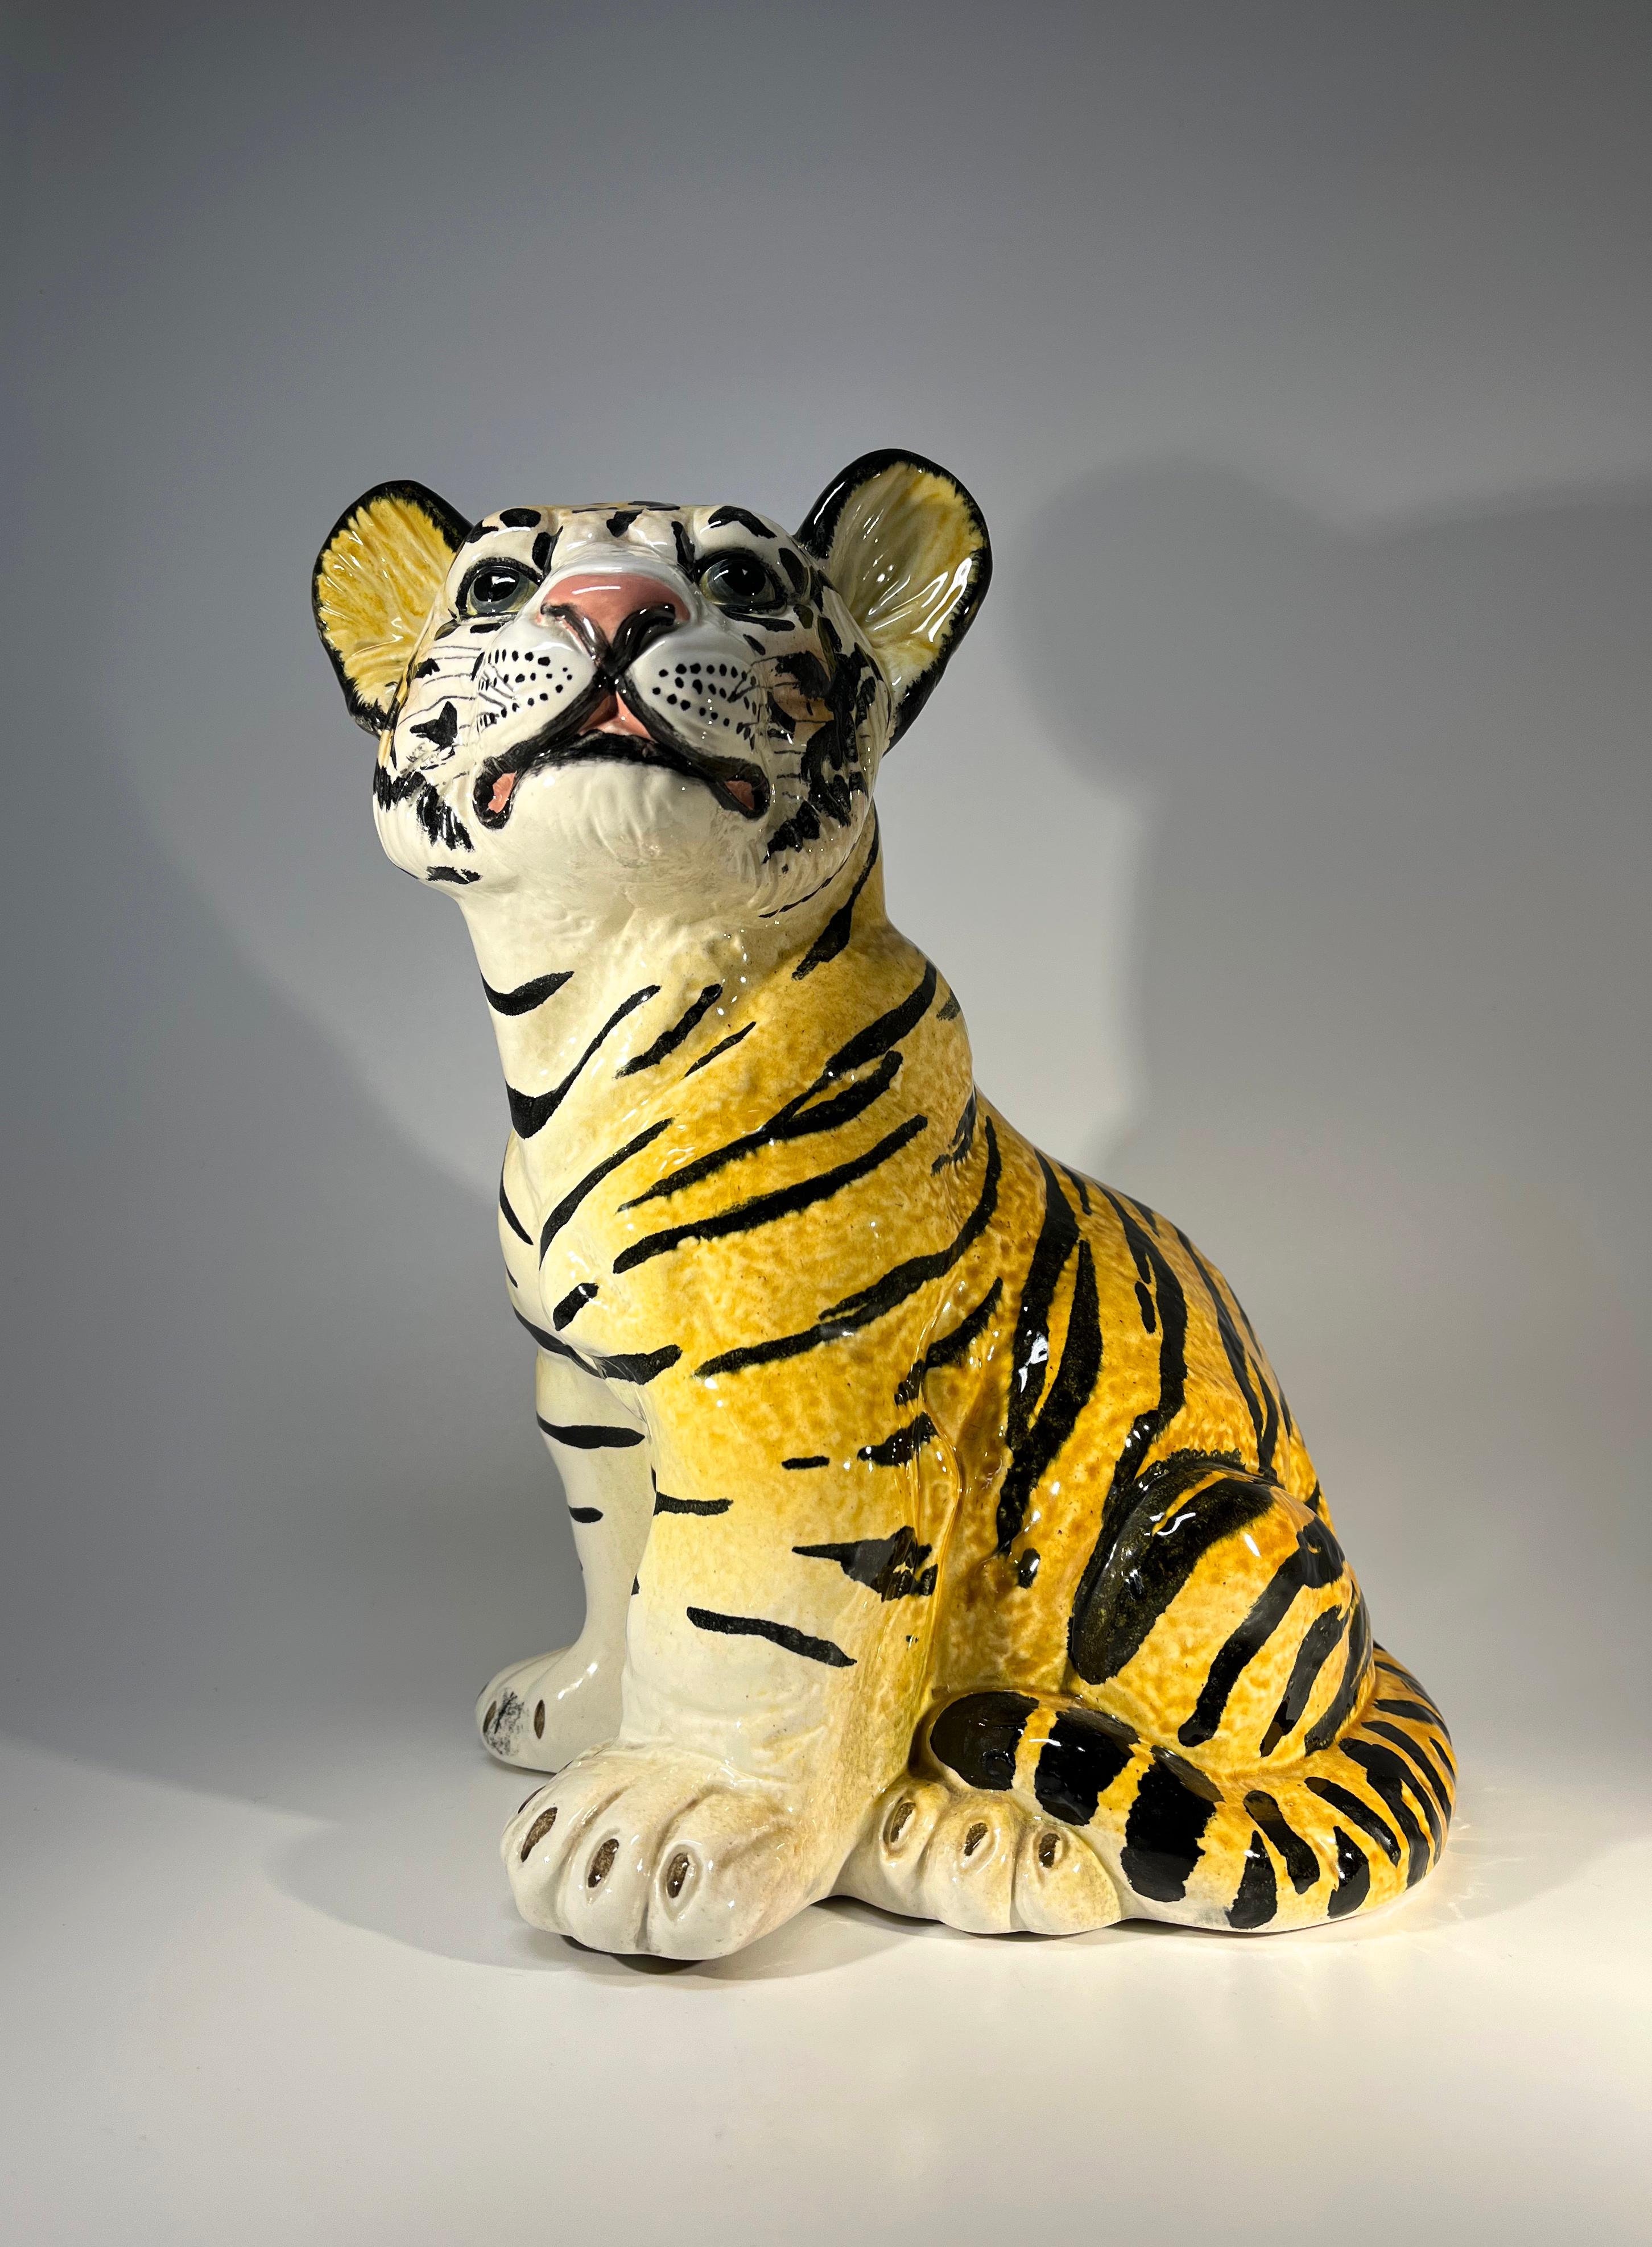 Undeniably appealing, Italian retro ceramic tiger cub from the 1960's
Hand painted and glazed, vibrant and striking
Circa 1960's
Signed Italy
Height 10 inch, Width 8 inch, Depth 6 inch
In excellent condition
Wear consistent with age and use